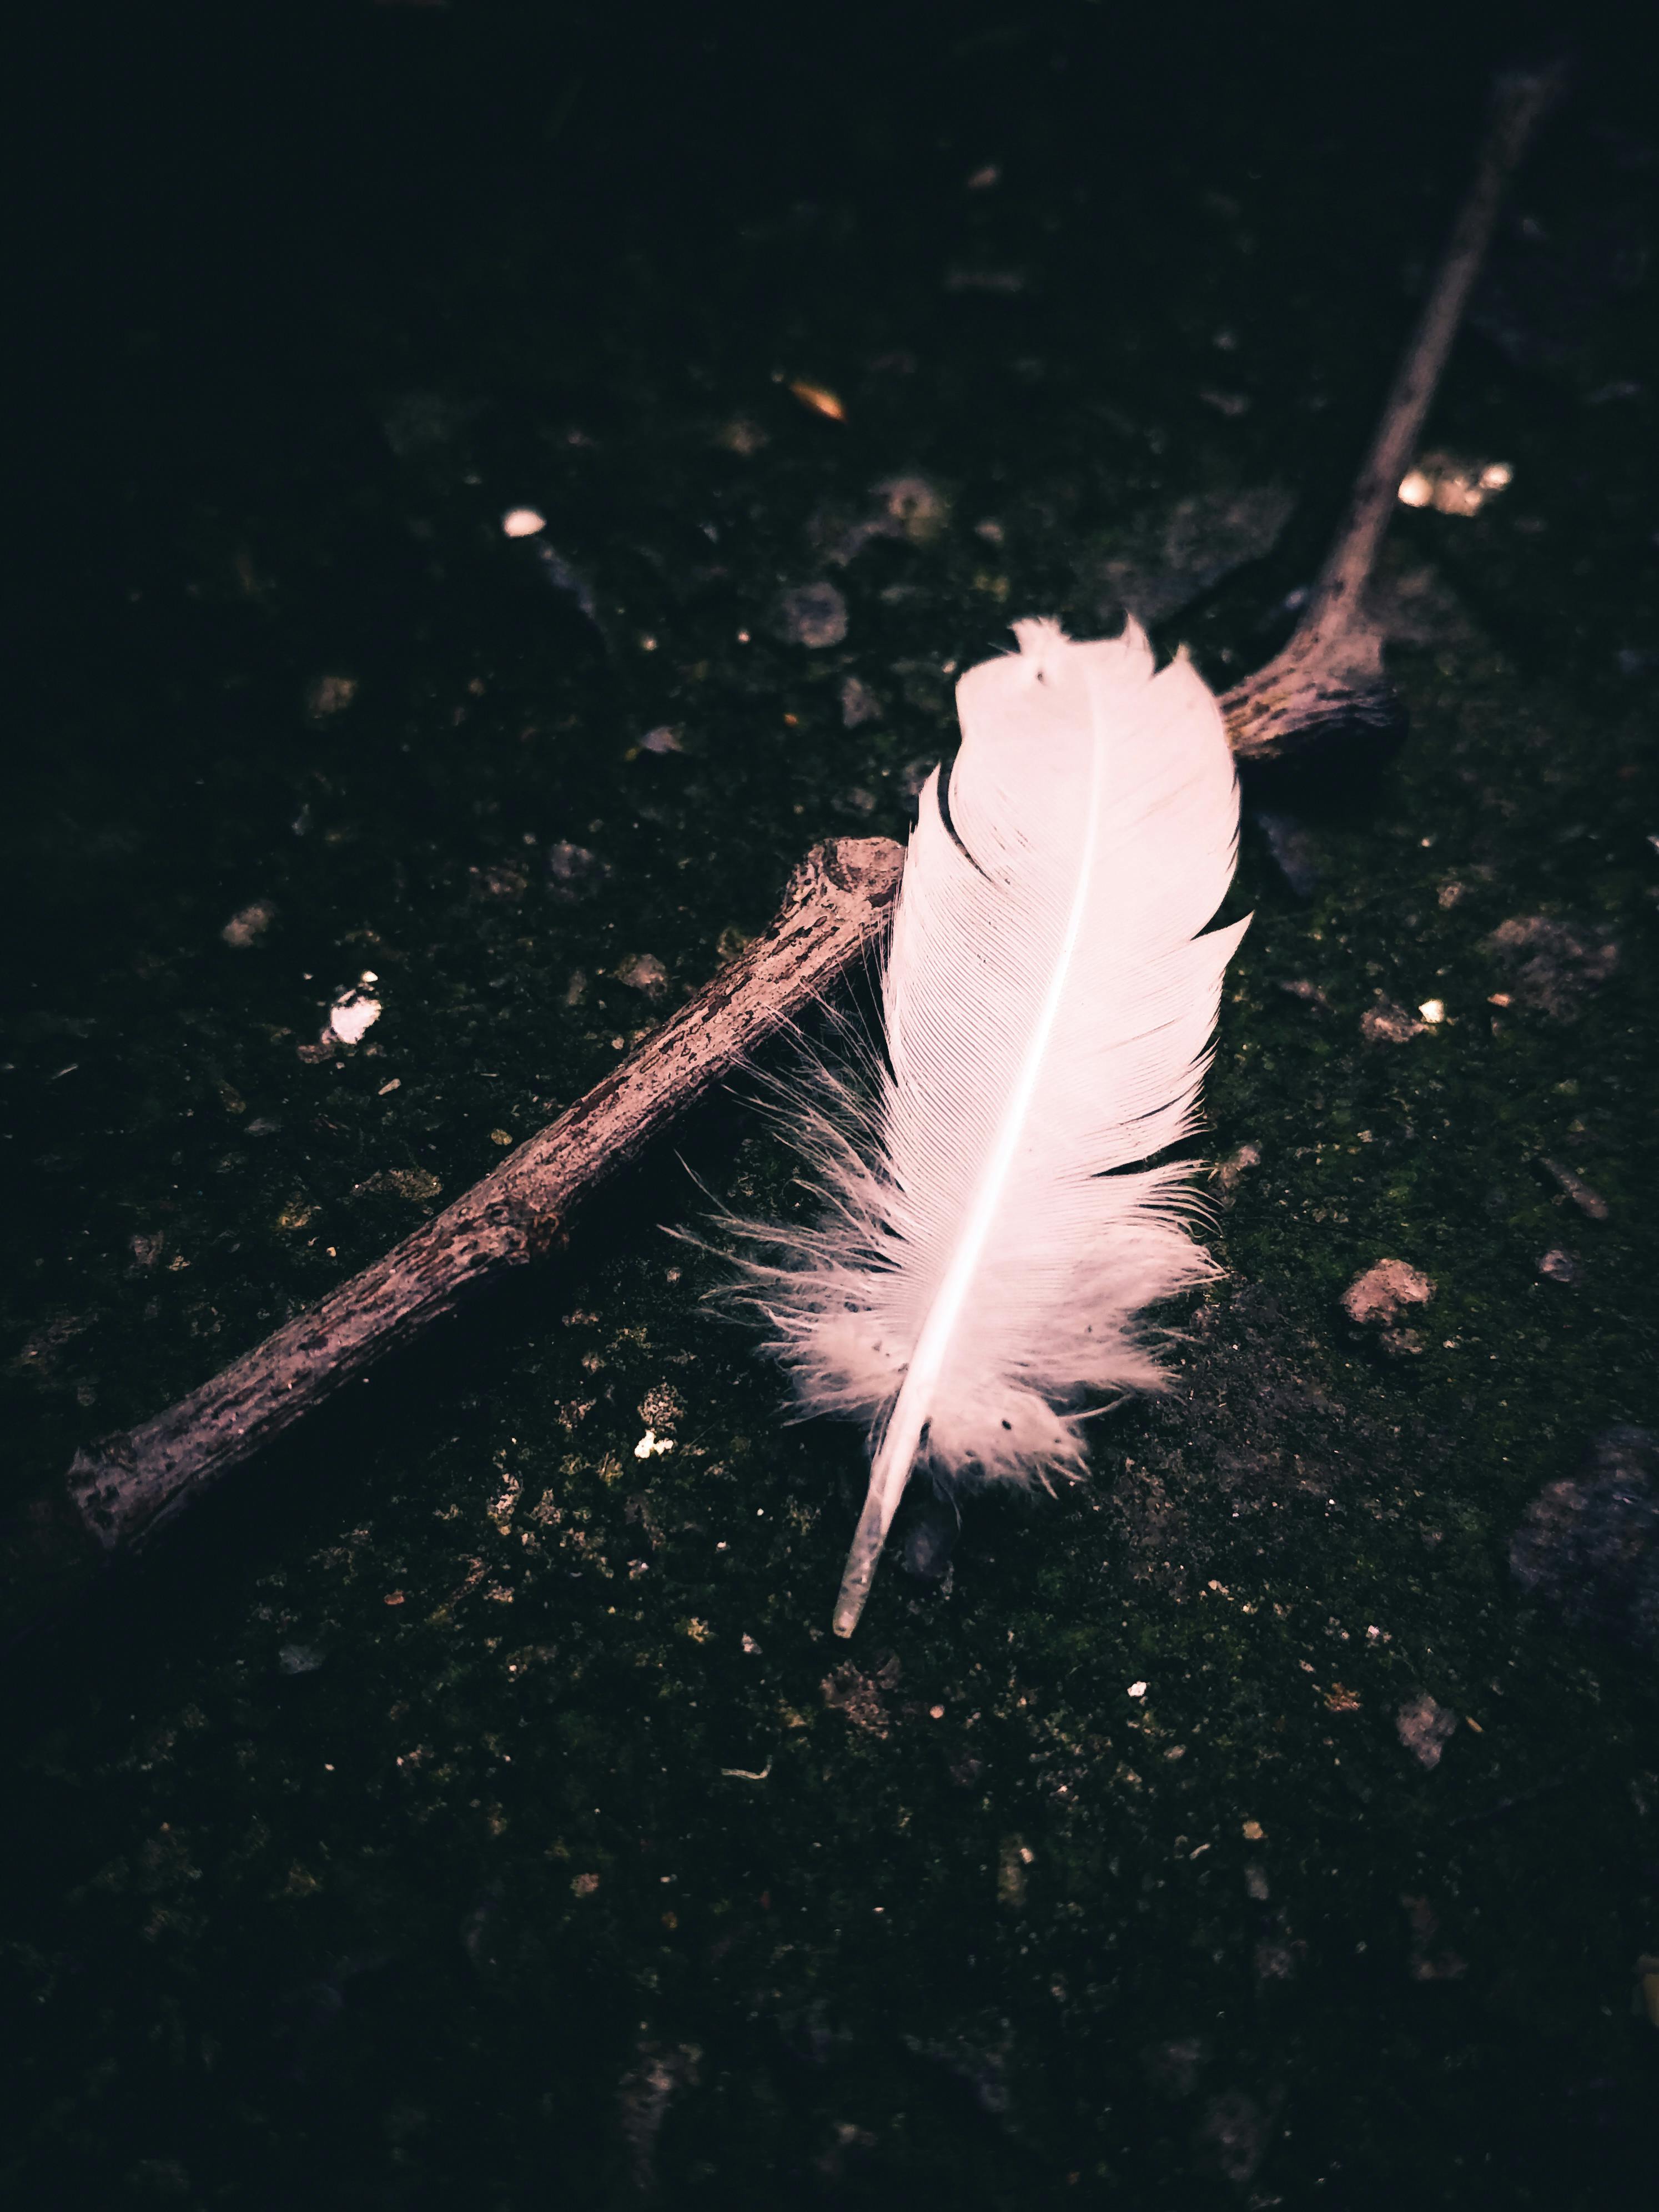 Best Feather iPhone HD Wallpapers  iLikeWallpaper